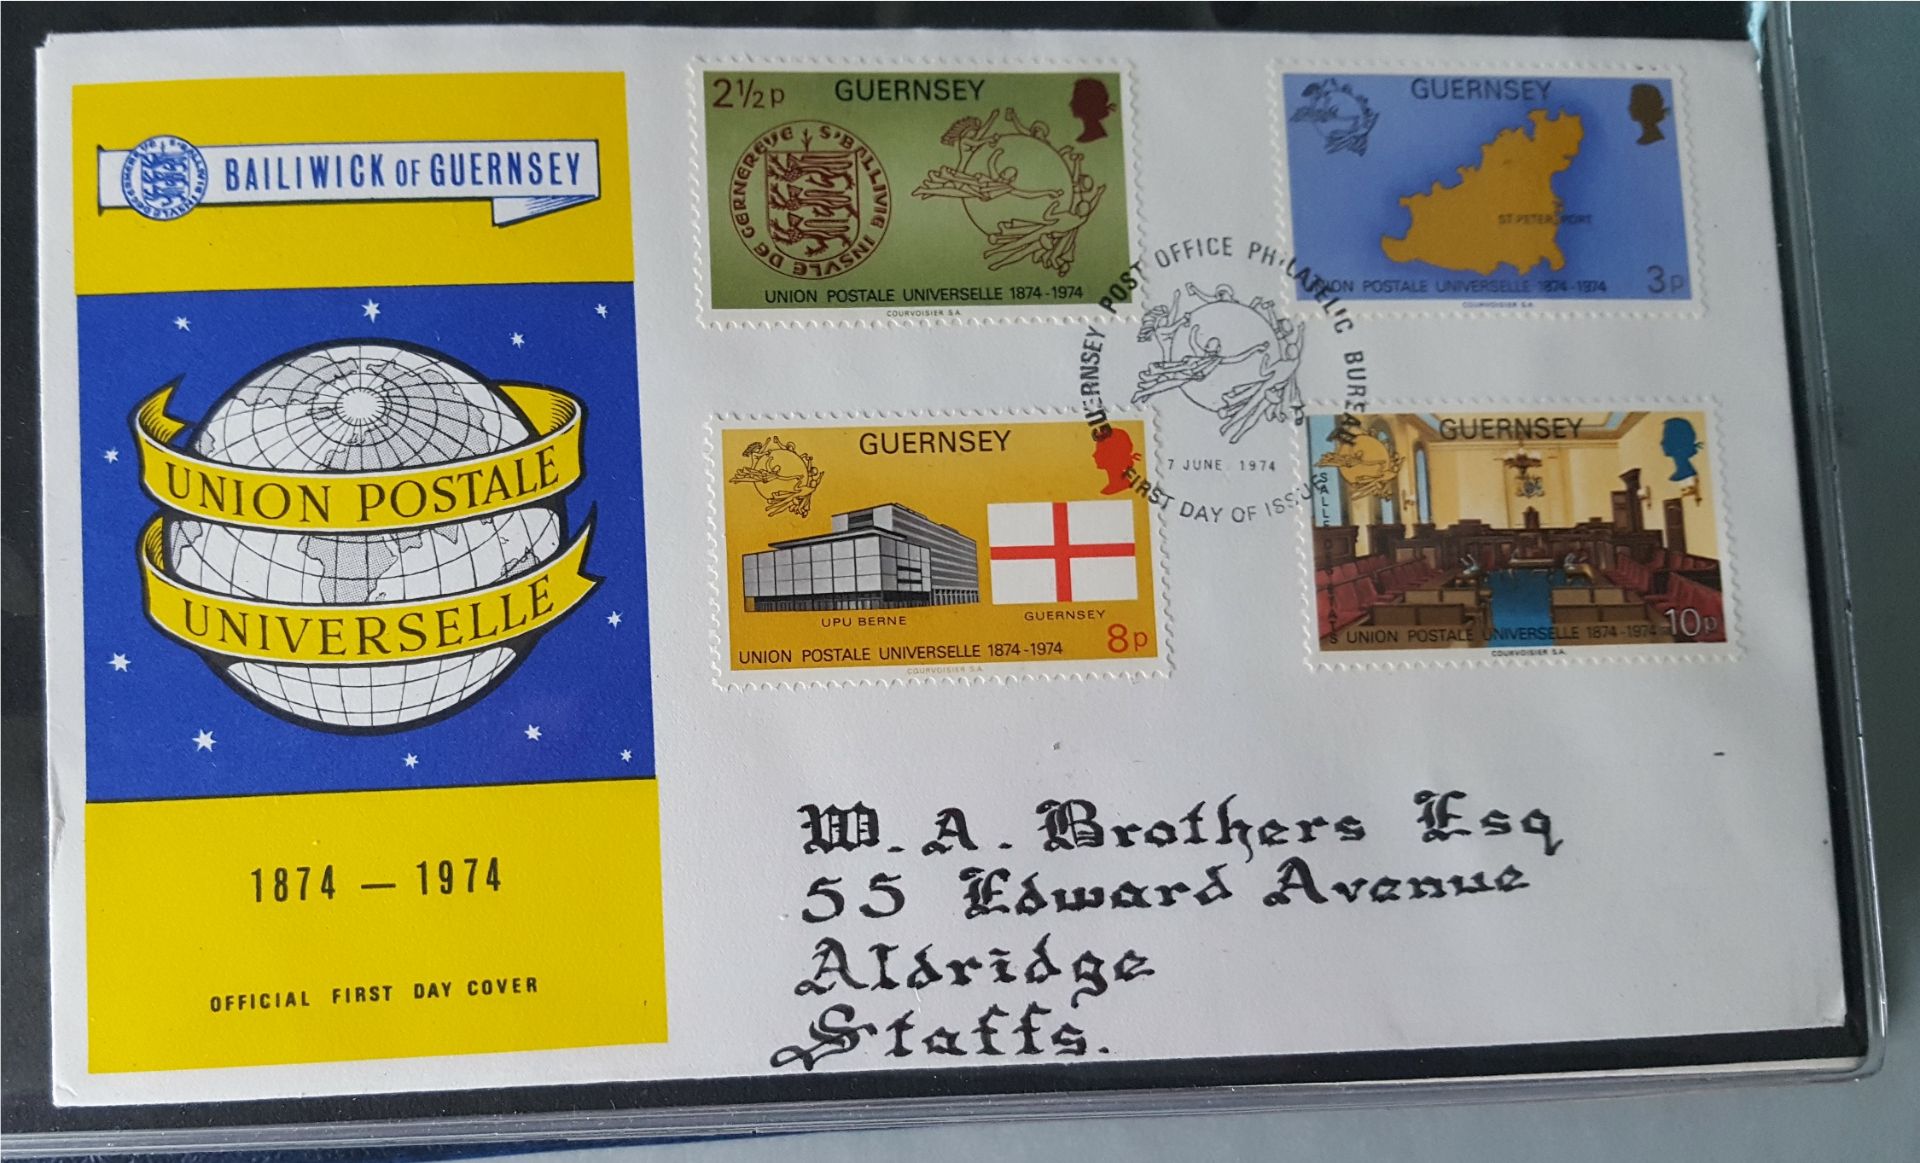 Vintage Retro Collection of First Day Covers Bailiwick of Guernsey 40 FDC's In Folder c1970's - Image 3 of 6